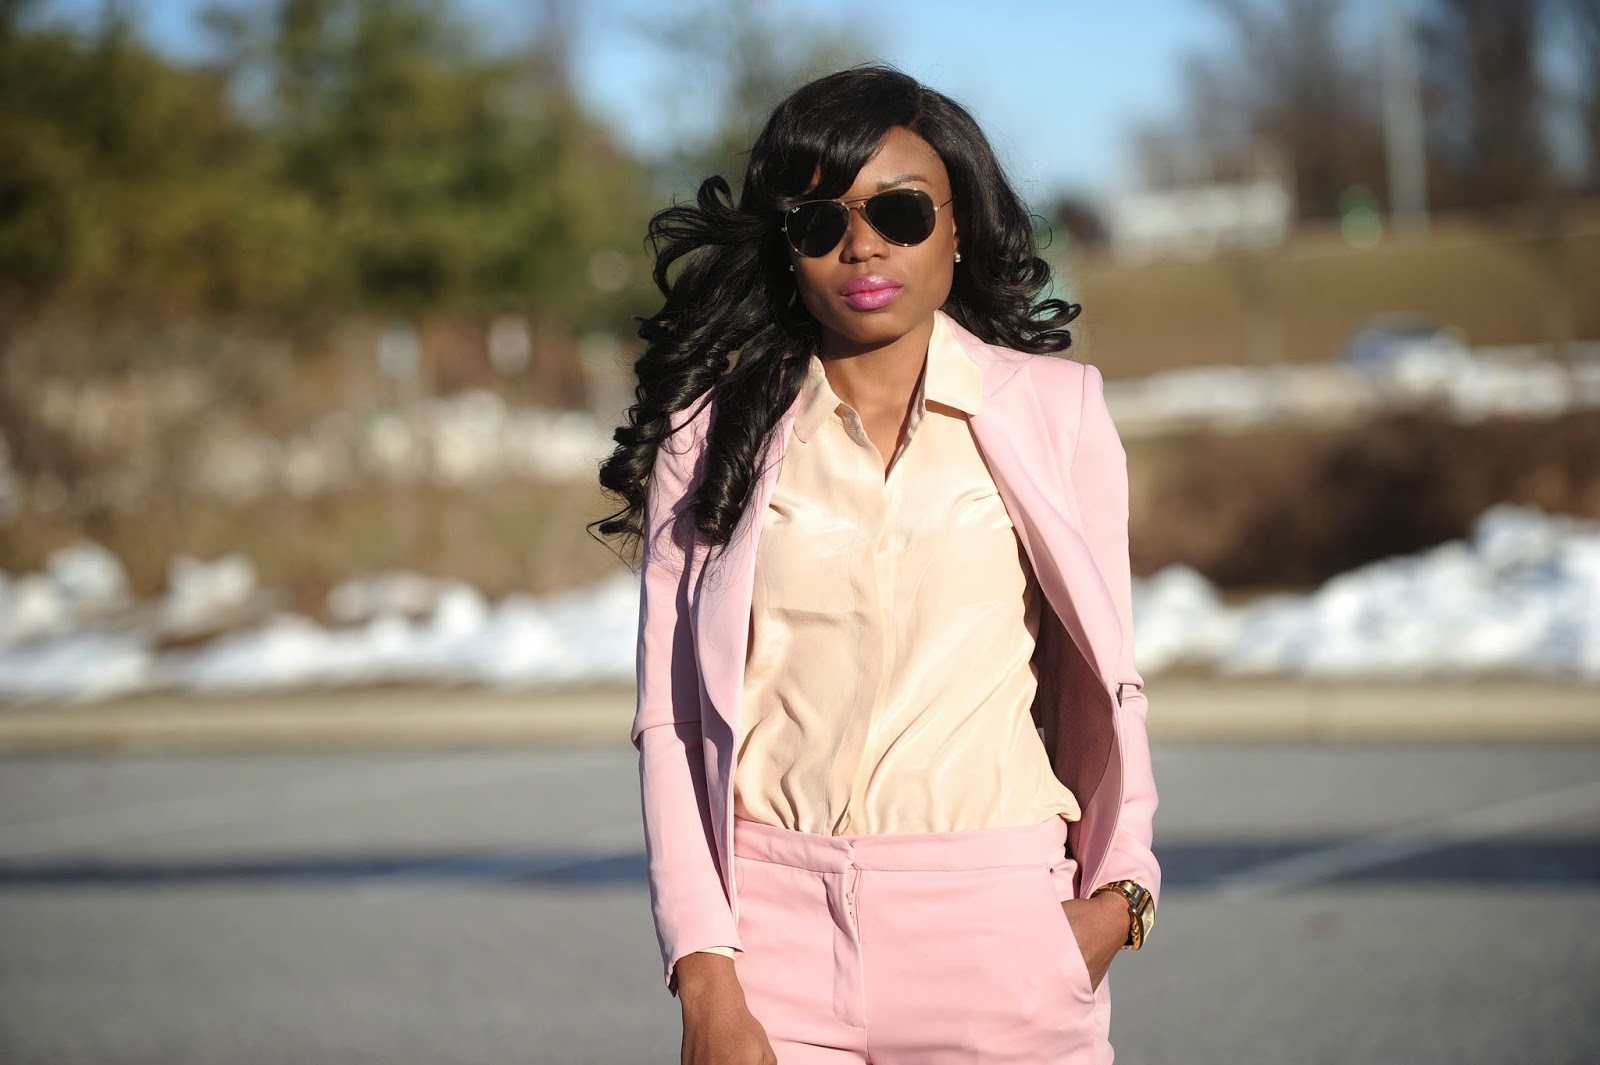 Beige Blazer with Pink Pants Outfits For Women (1 ideas & outfits)